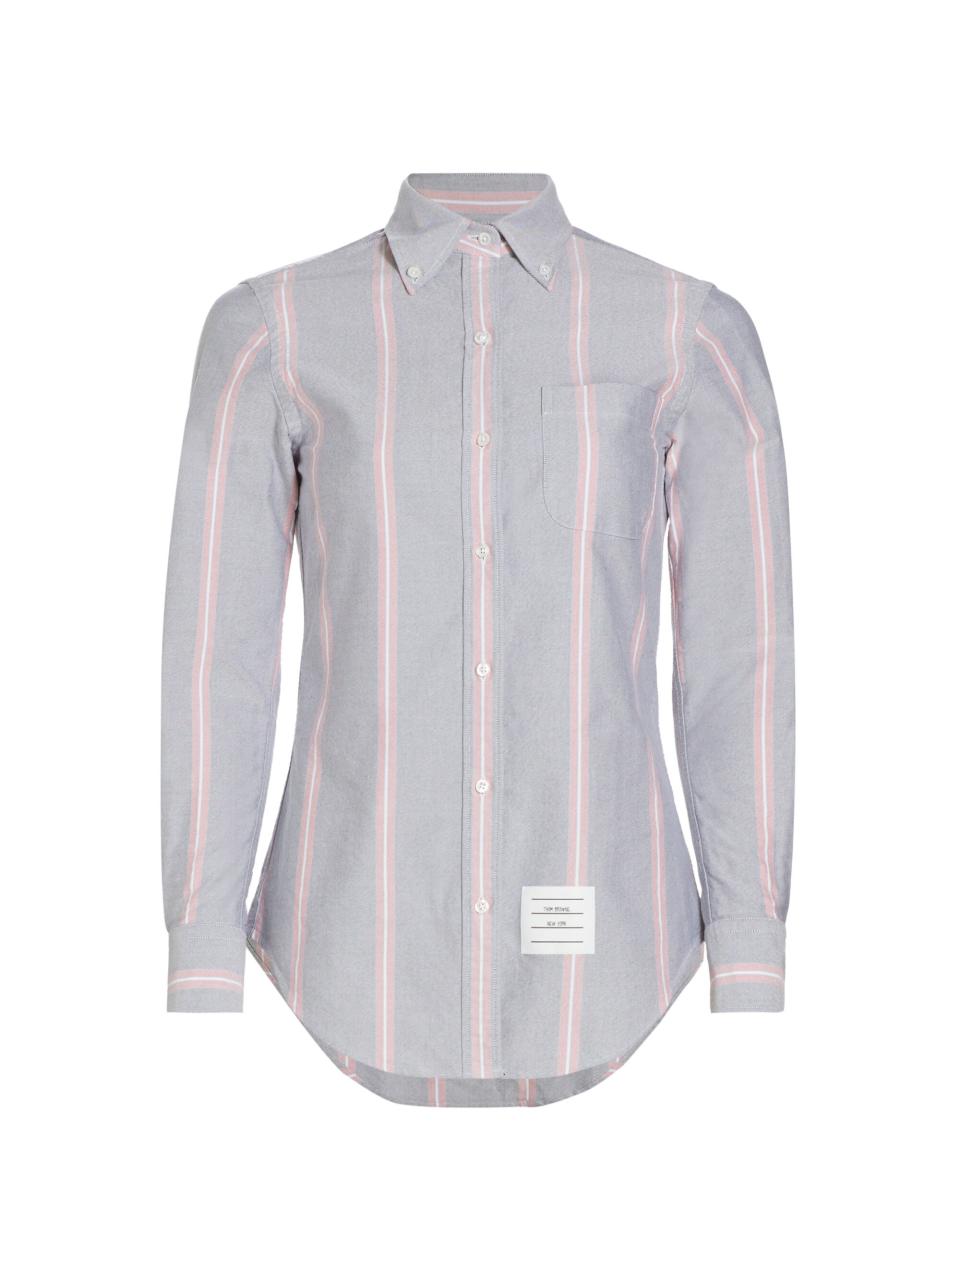 Thom Browne and Saks Cotton Oxford Button Down Shirt